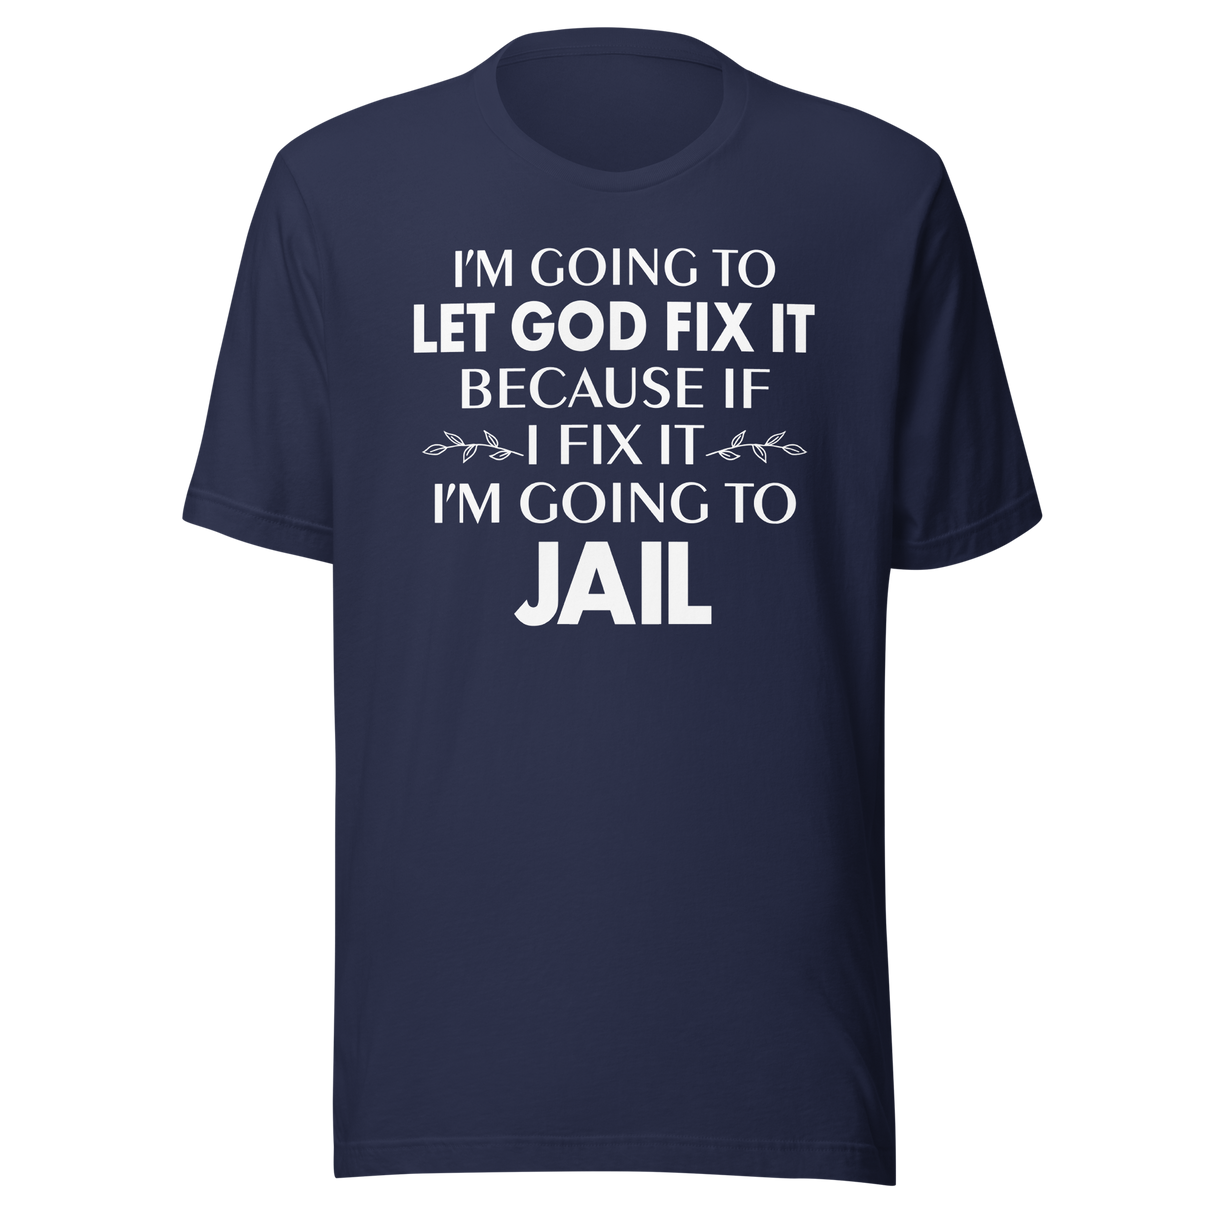 im-going-to-let-god-fix-it-because-if-i-fix-it-im-going-to-jail-faith-tee-faith-t-shirt-trust-tee-surrender-t-shirt-belief-tee#color_navy